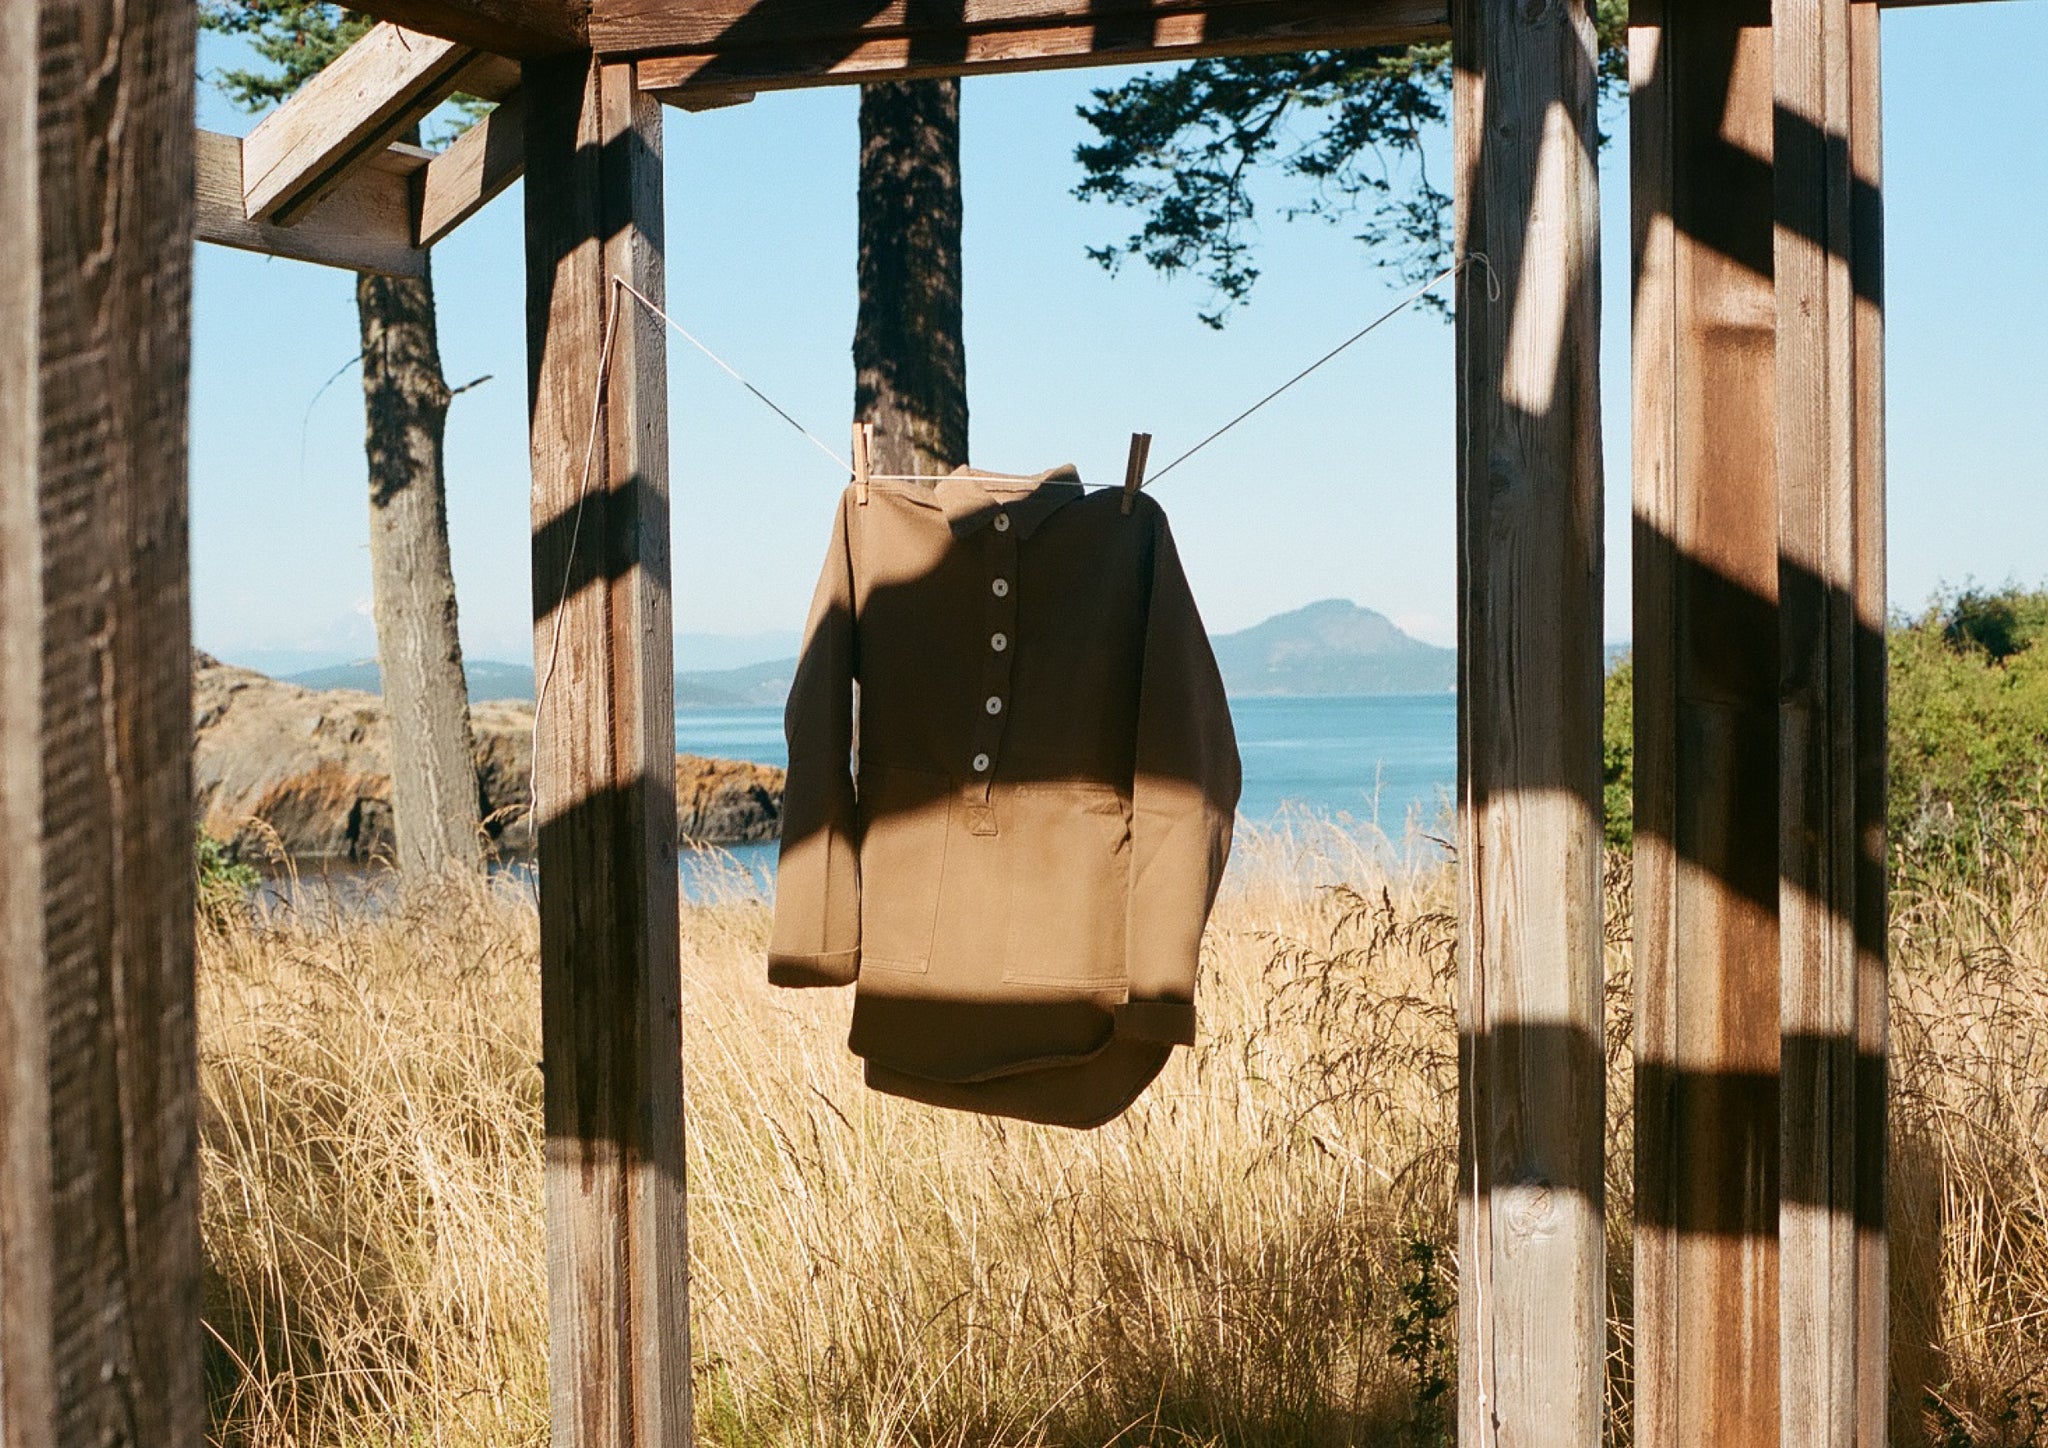 A brown shirt hanging in the open